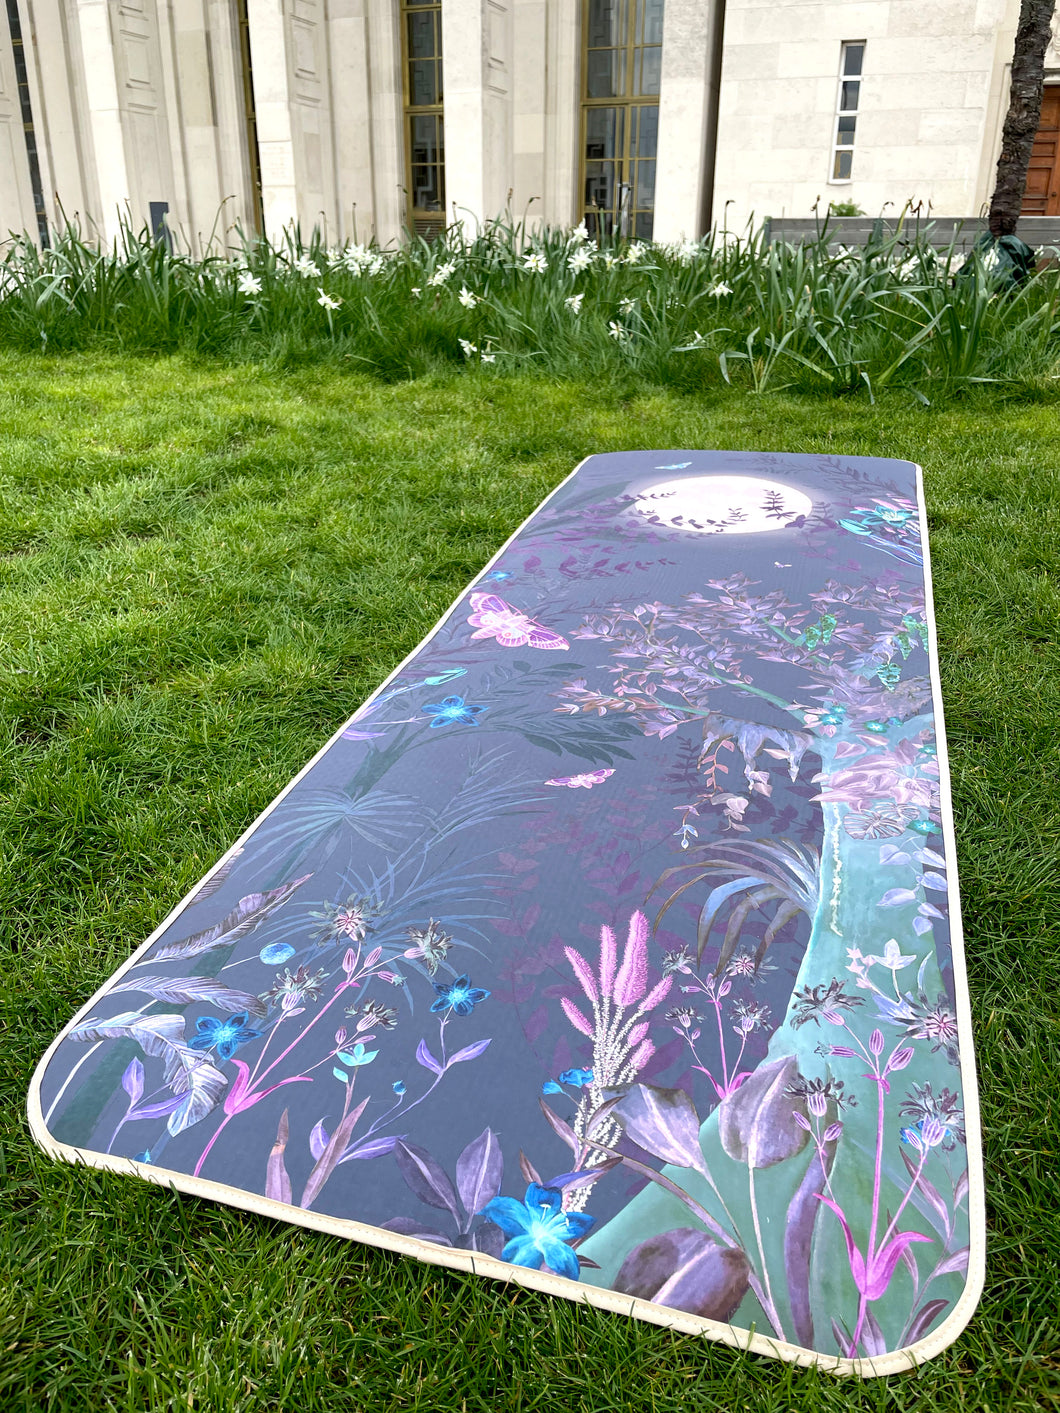 The 'Enchanted forest' print yoga mat for pilates, yoga and relaxation –  Alice Acreman Silks